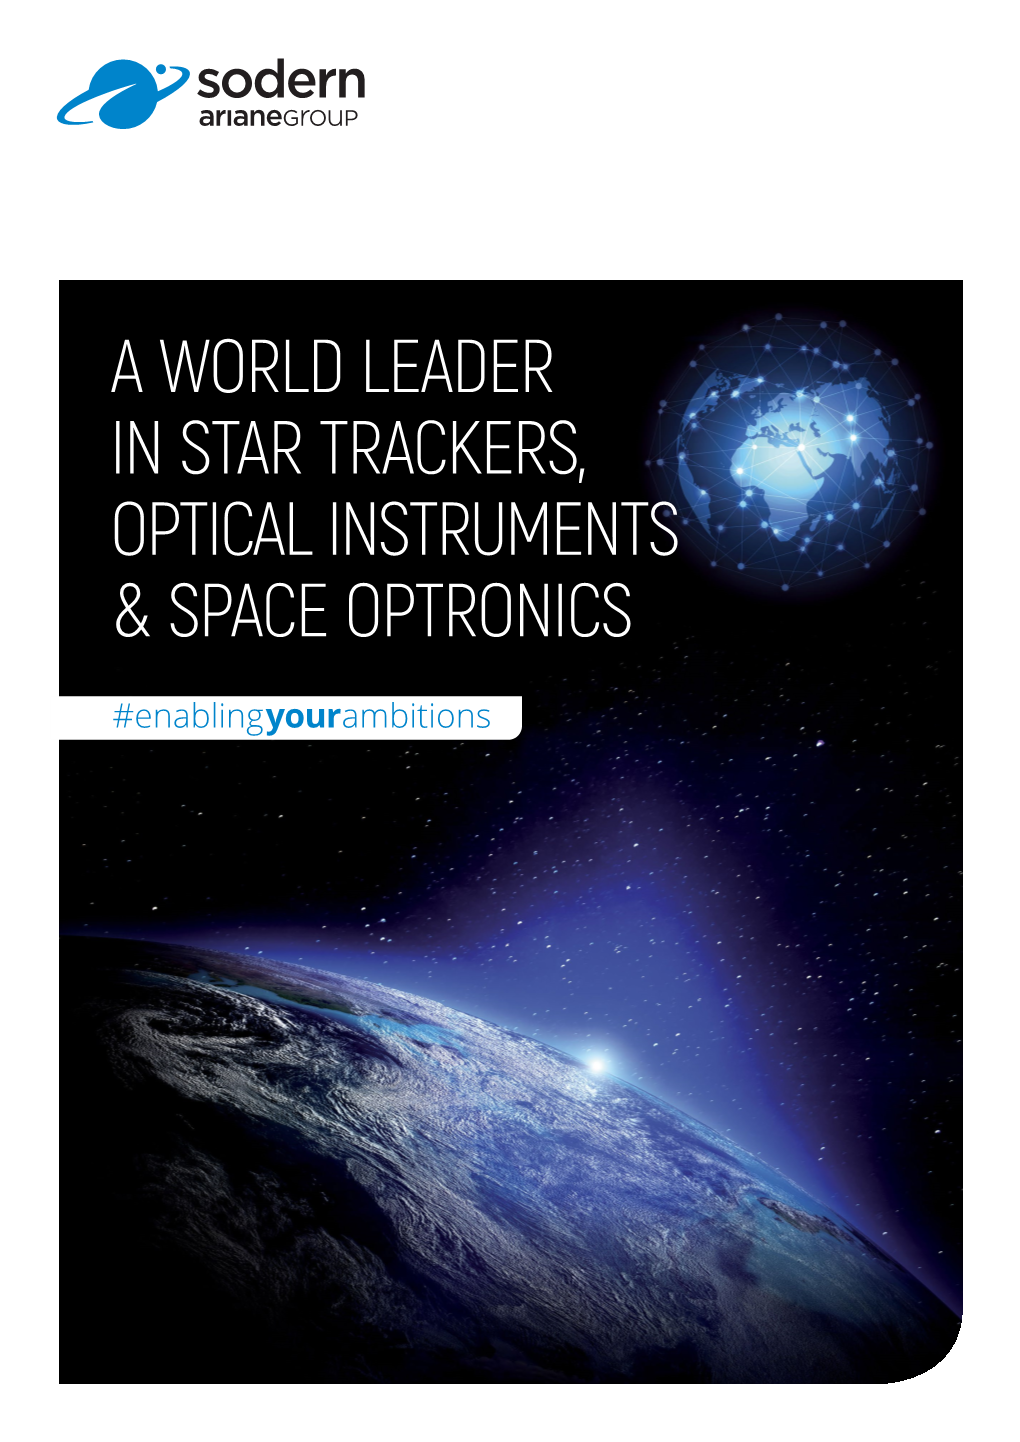 A World Leader in Star Trackers, Optical Instruments & Space Optronics